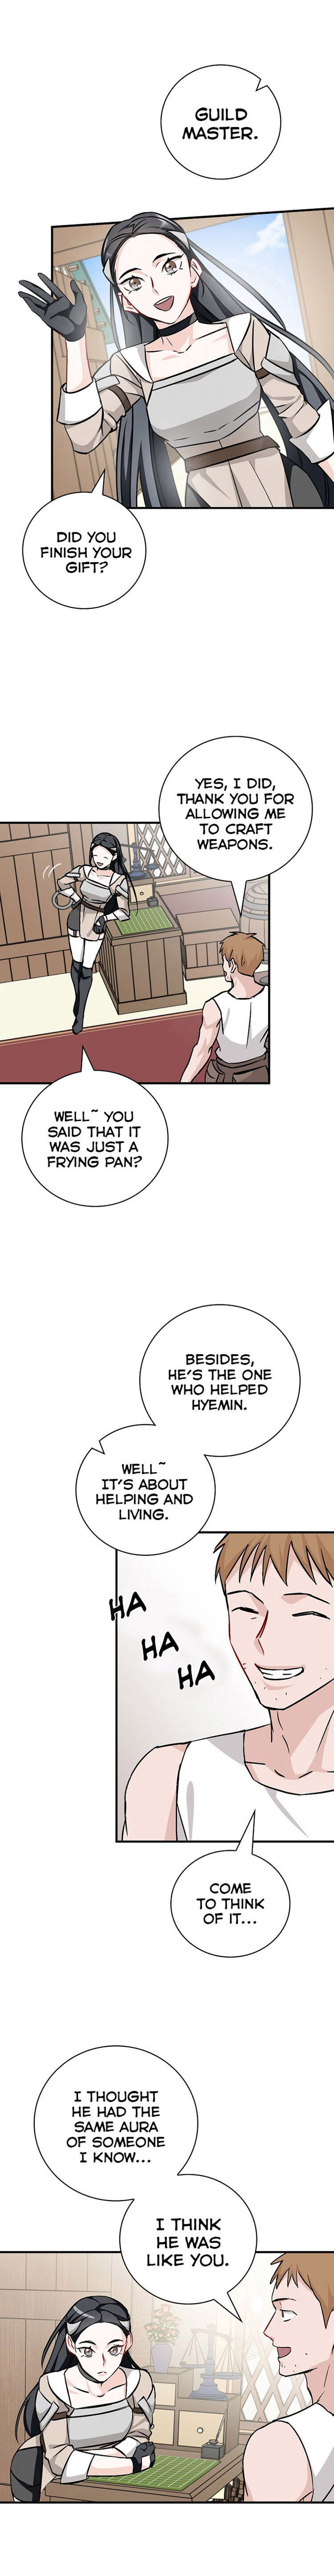 leveling-up-by-only-eating-chap-41-14